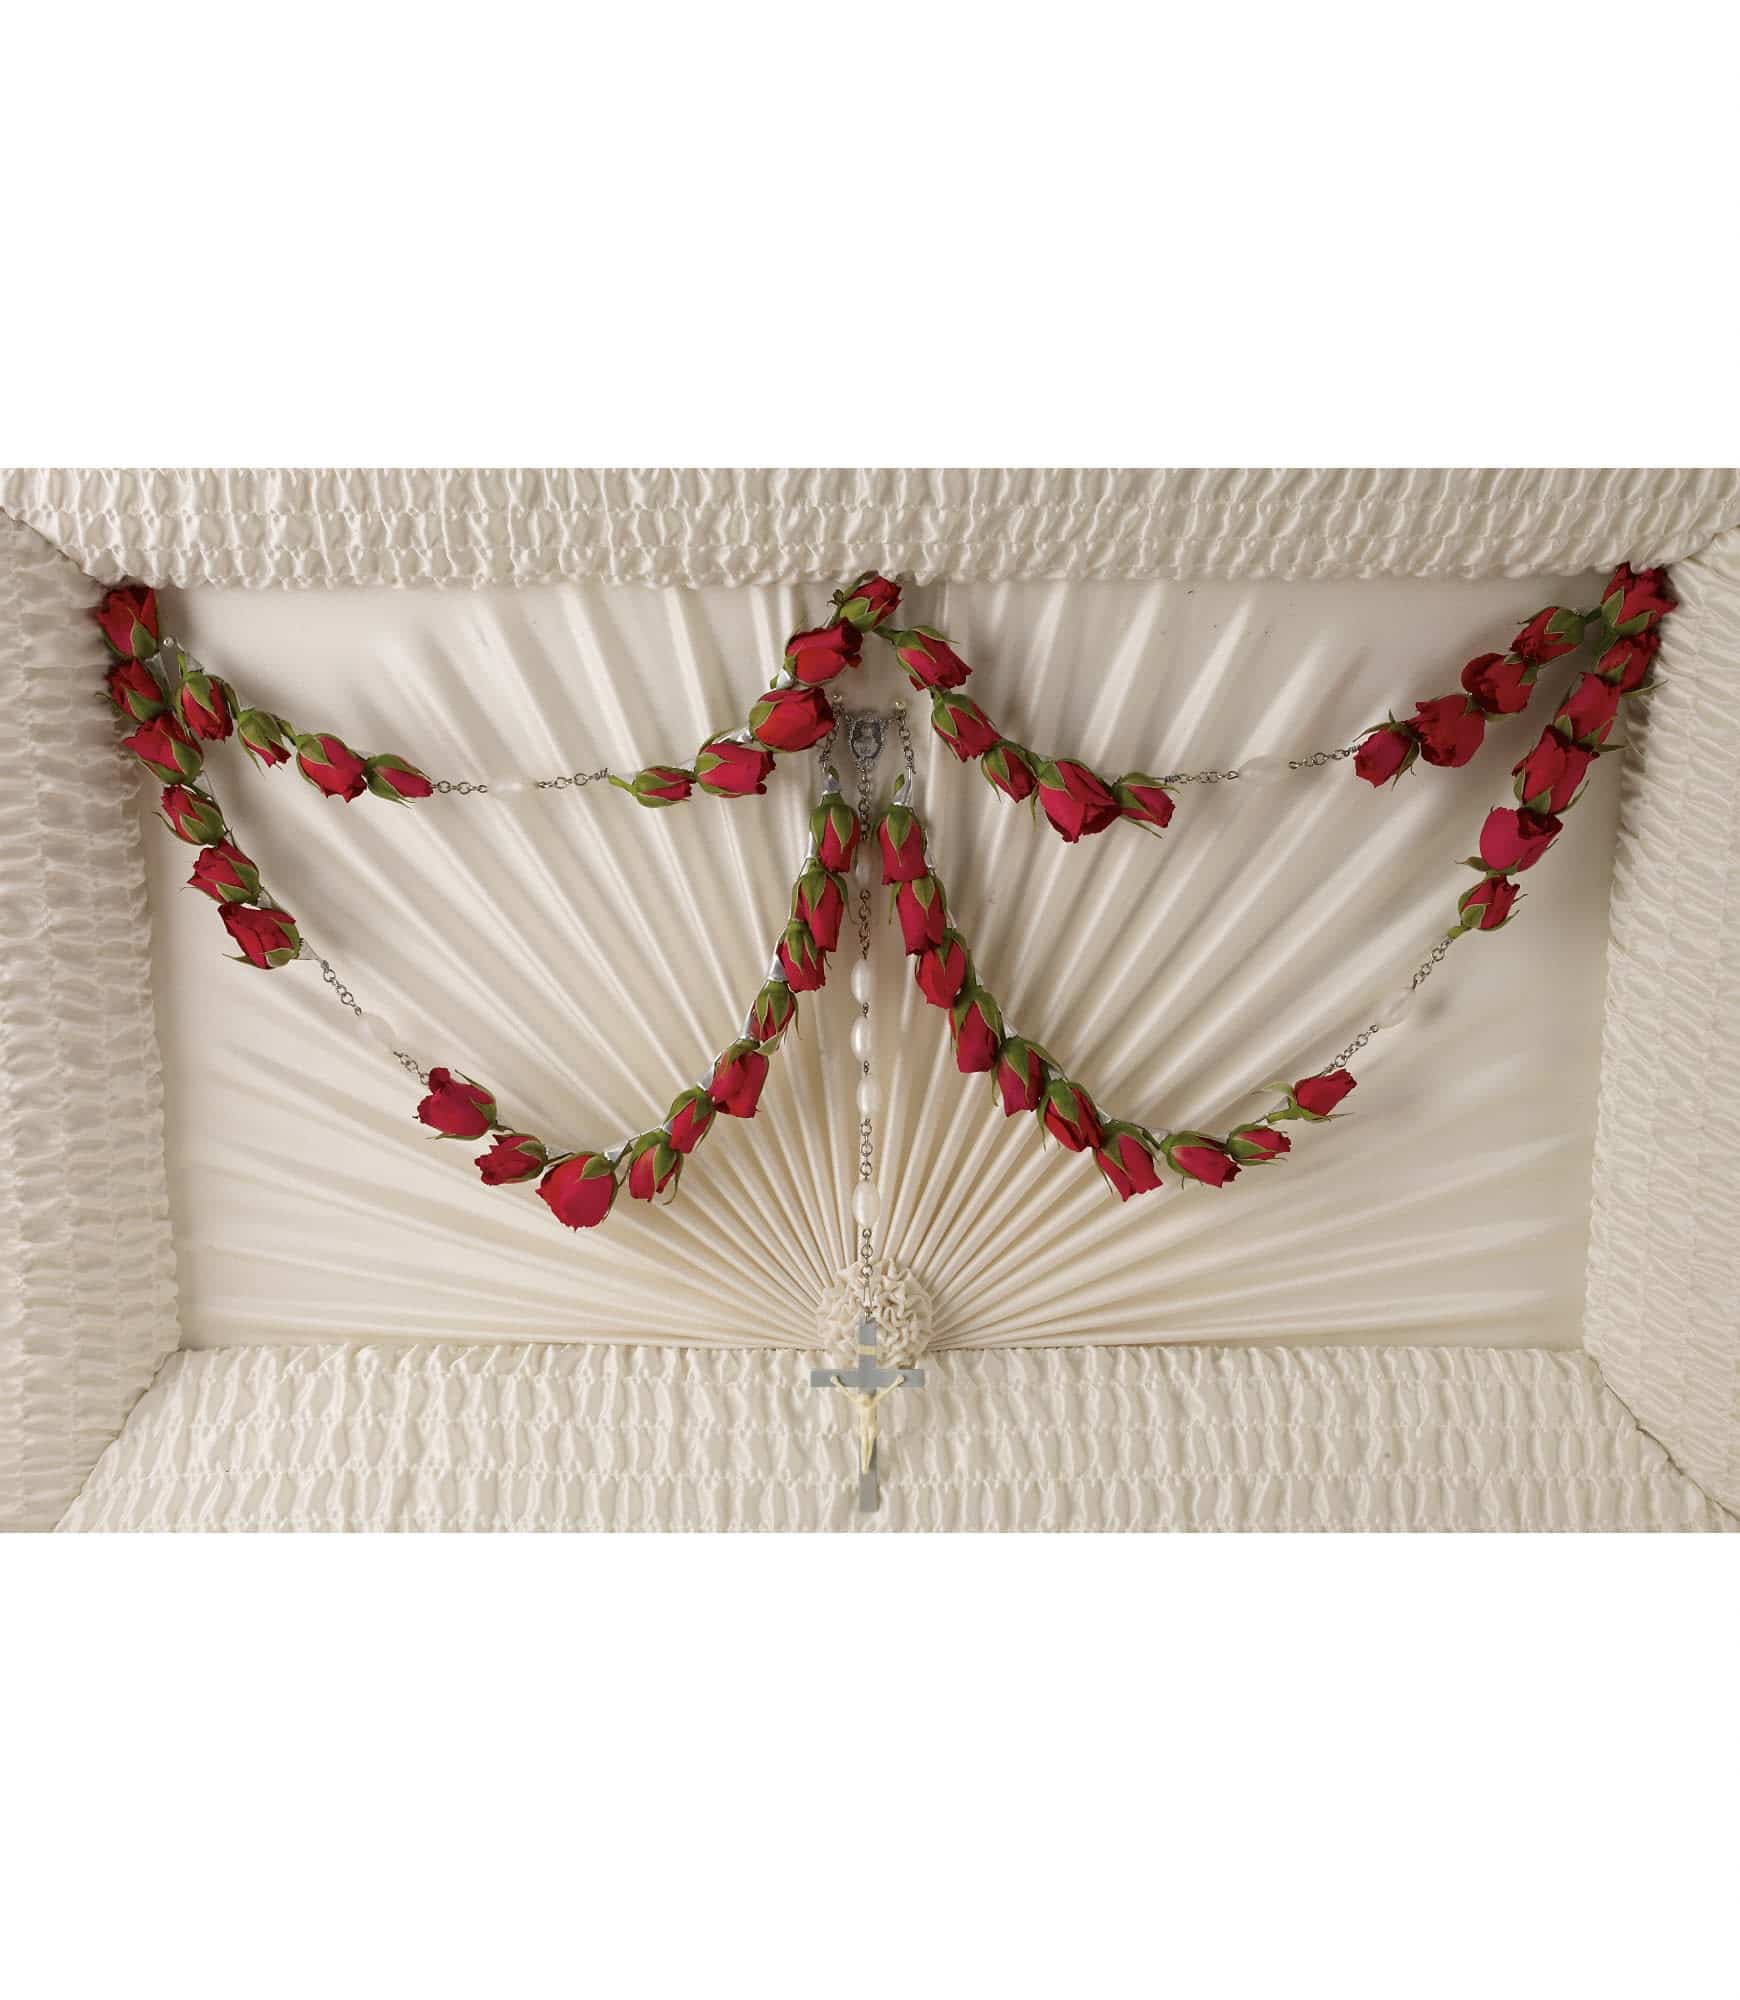 50-bead rosary graced with red roses